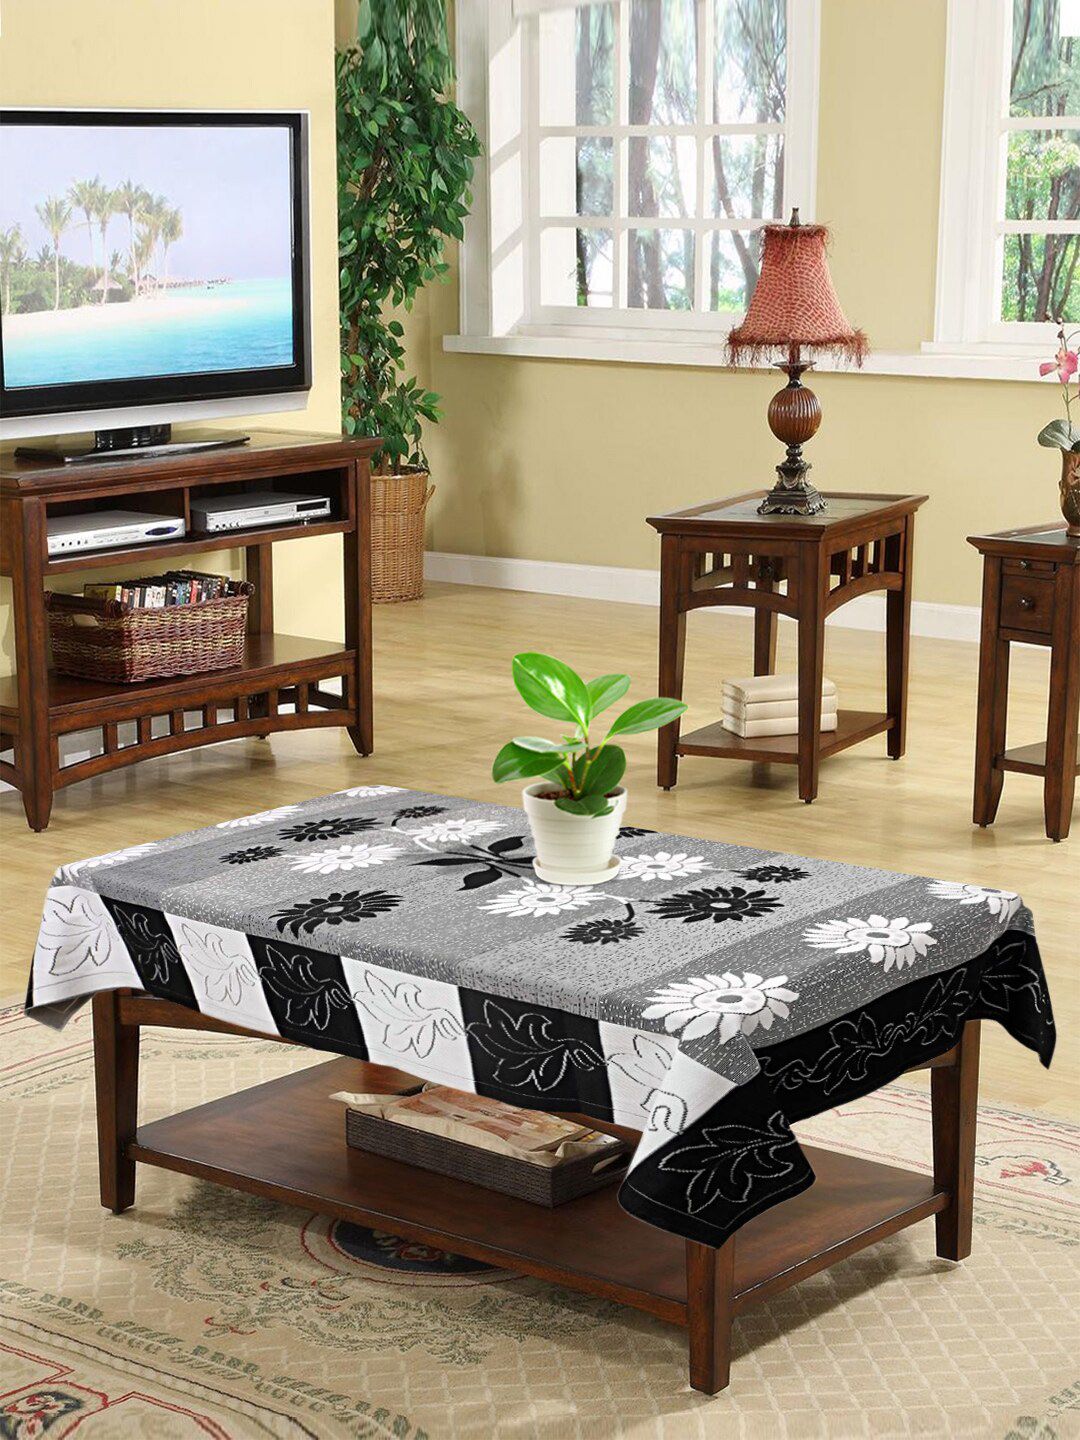 Kuber Industries Black & White Floral Printed 4-Seater Rectangle Cotton Table Cover Price in India